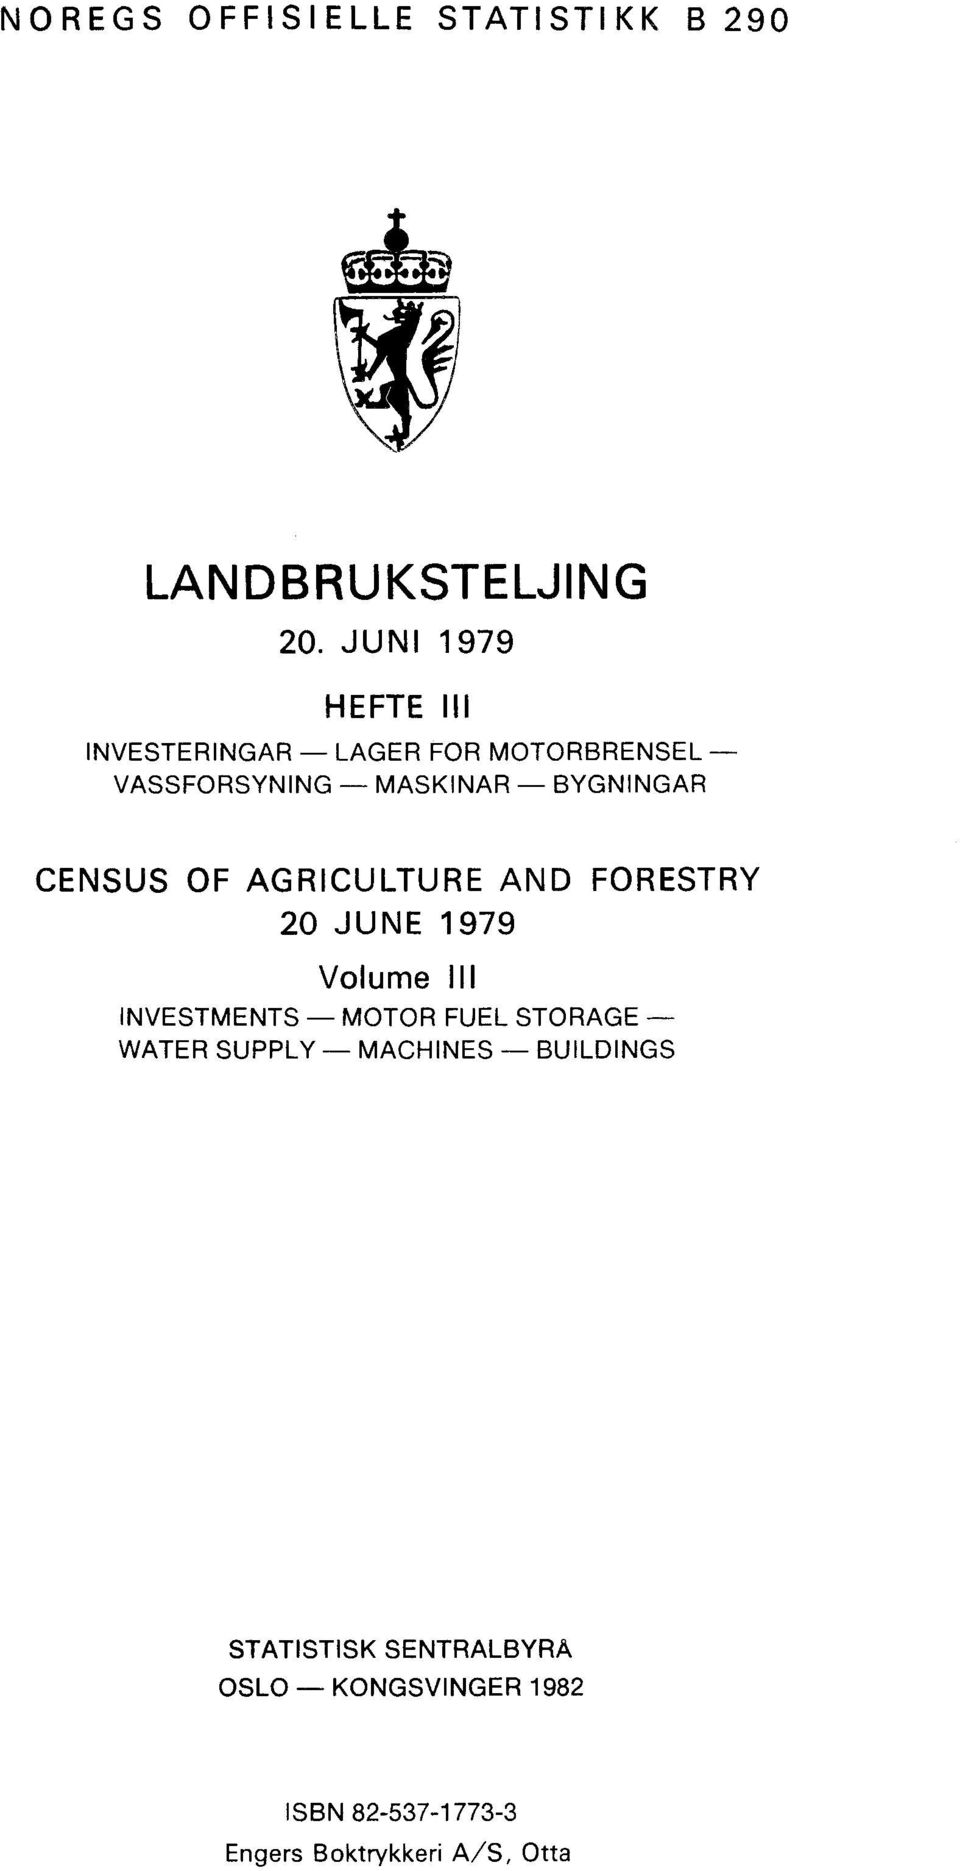 CENSUS OF AGRICULTURE AND FORESTRY 20 JUNE 1979 Volume III INVESTMENTS MOTOR FUEL STORAGE